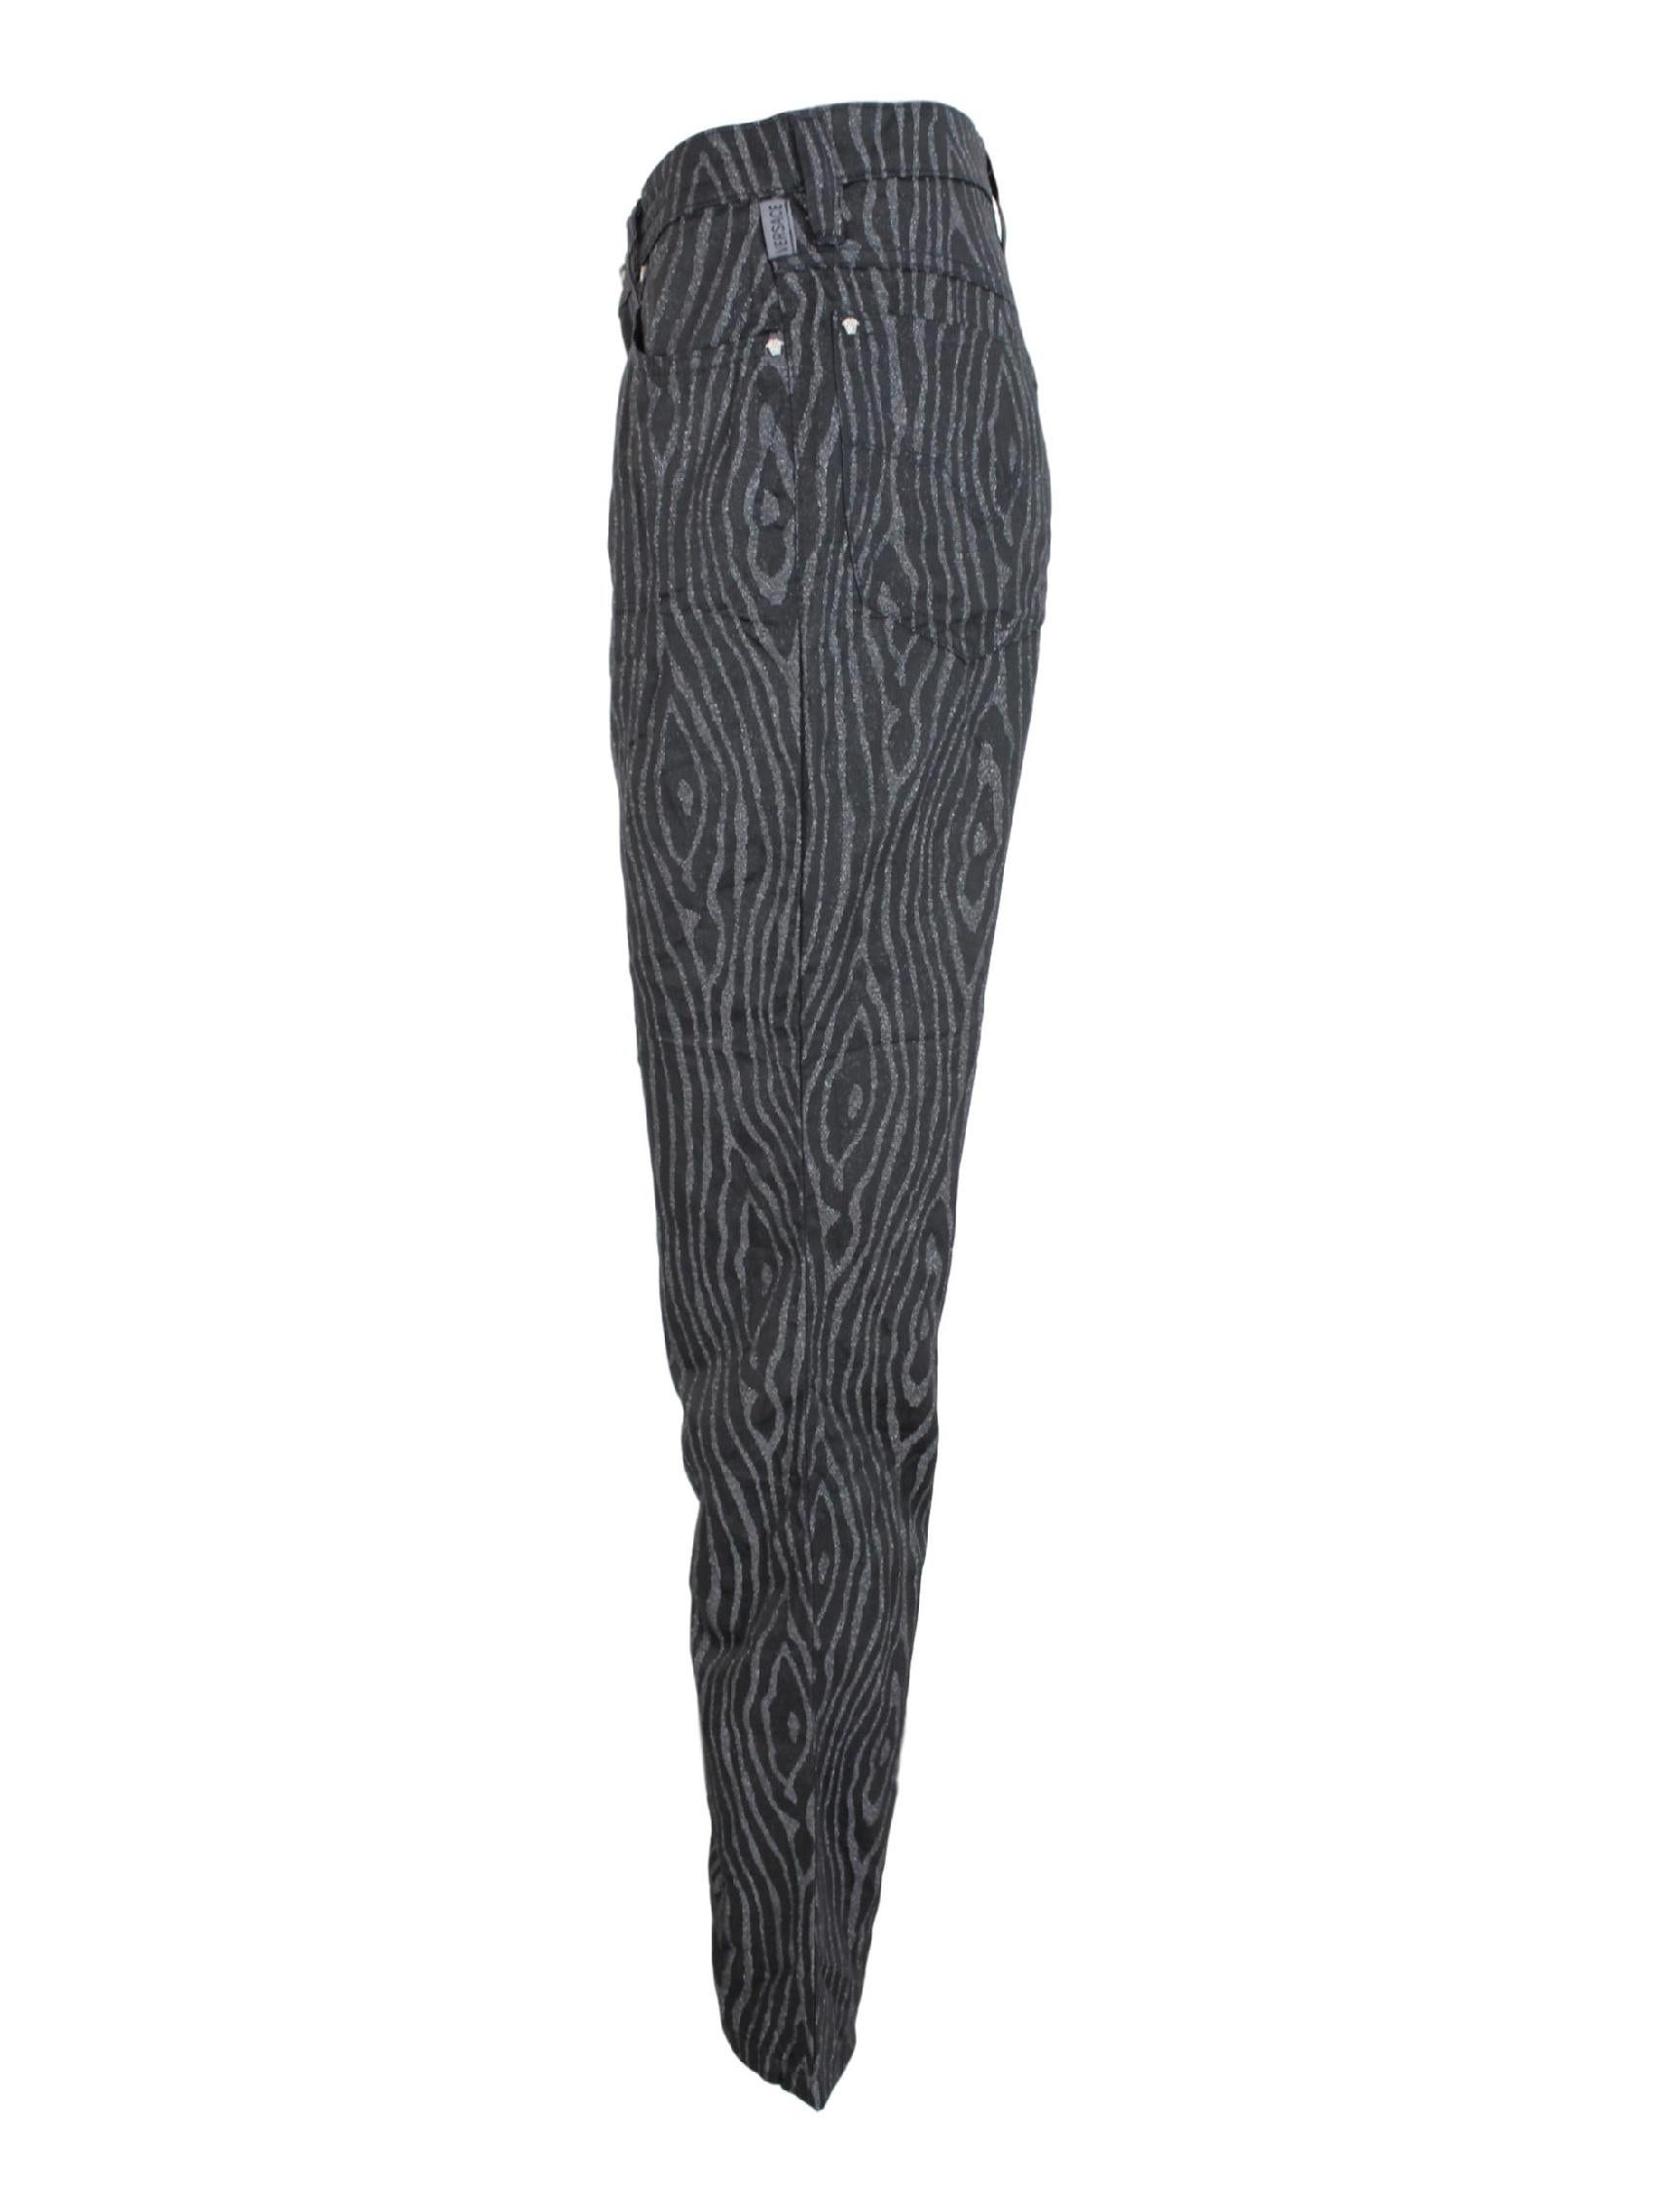 Gianni Versace Black Gray Pinstripe Spotted Lurex Trousers 3